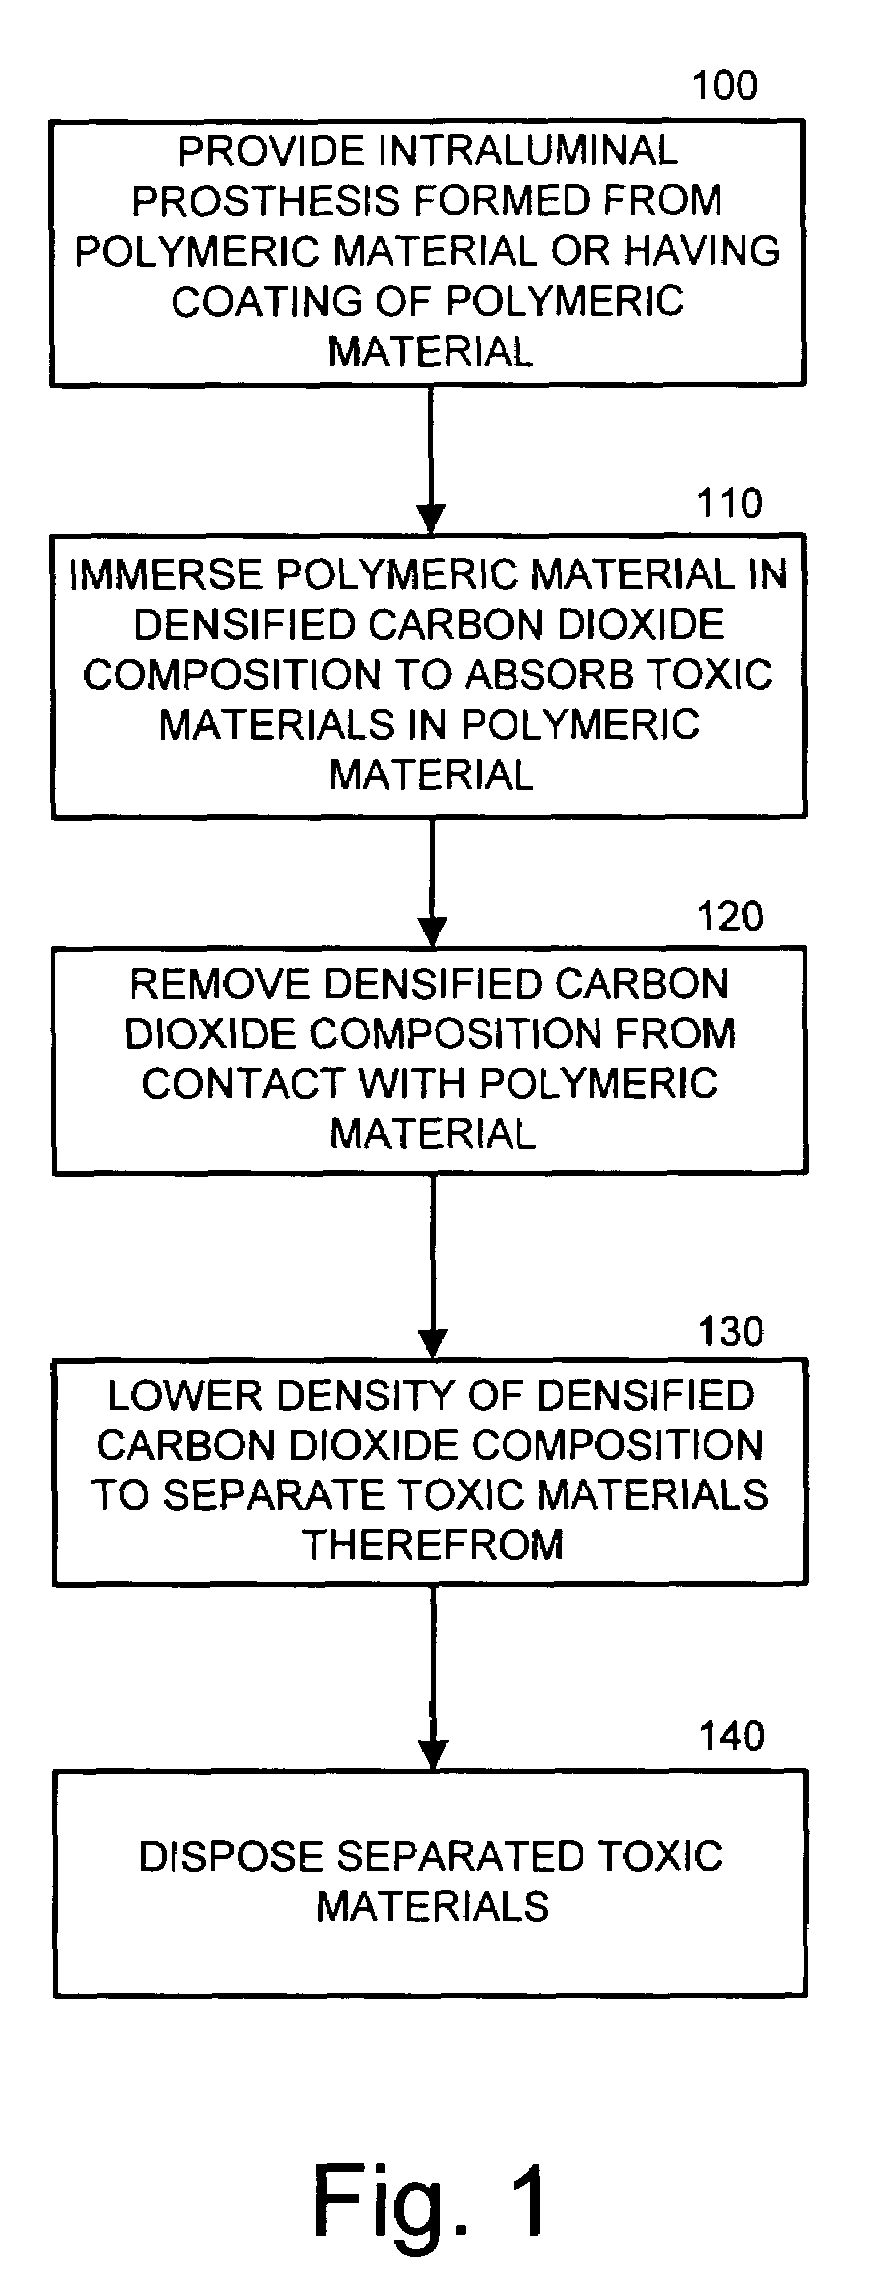 Carbon dioxide-assisted methods of providing biocompatible intraluminal prostheses